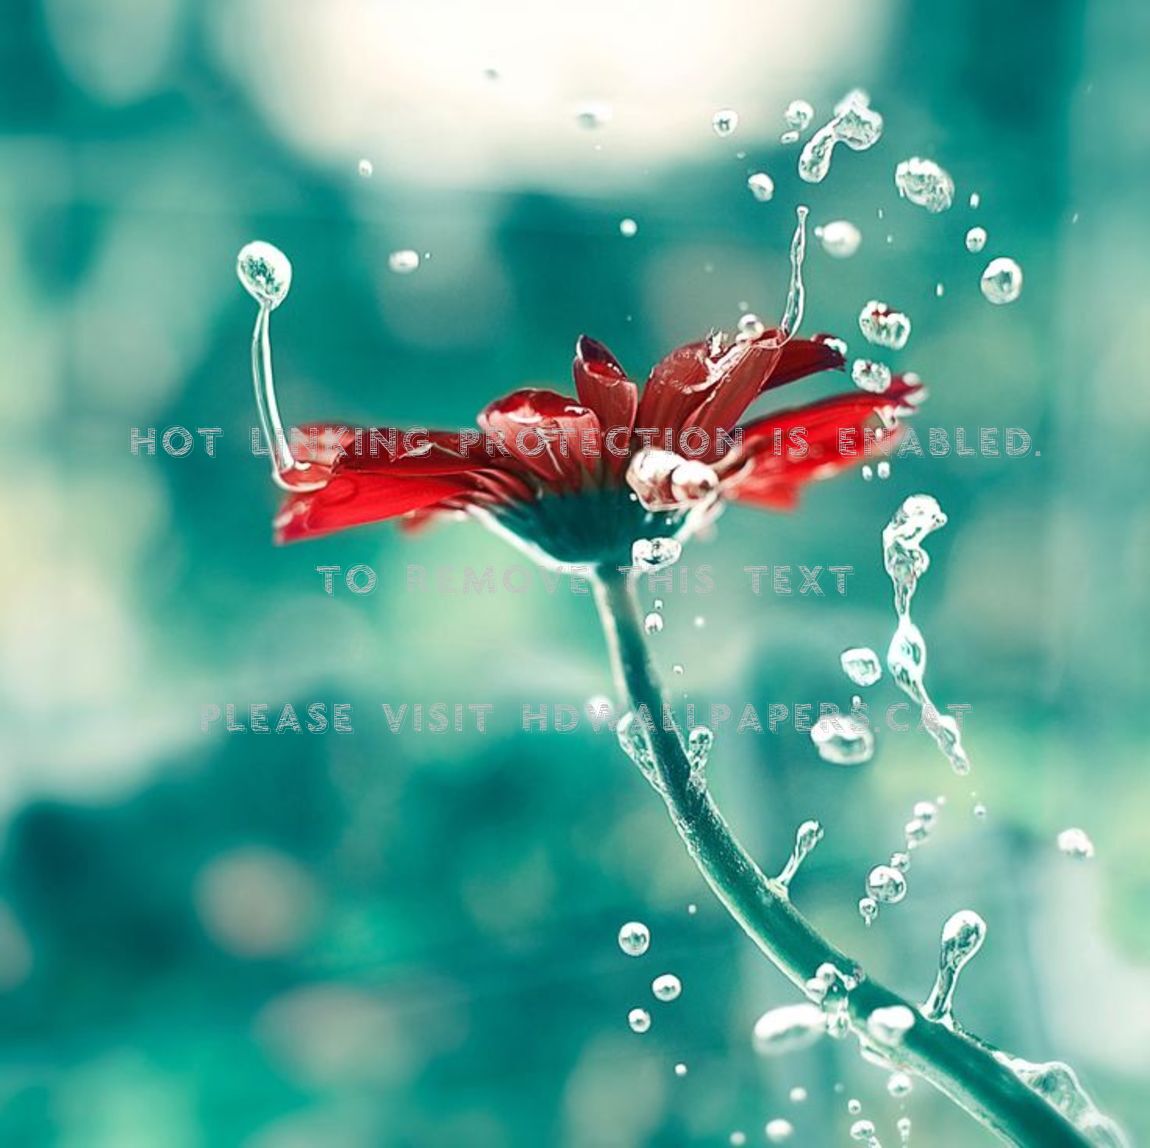 Flowers With Water Droplets 2148308 Hd Wallpaper Backgrounds Download Background business card button calendar christmas fire flowers logo resume ribbons smoke templates tree. flowers with water droplets 2148308